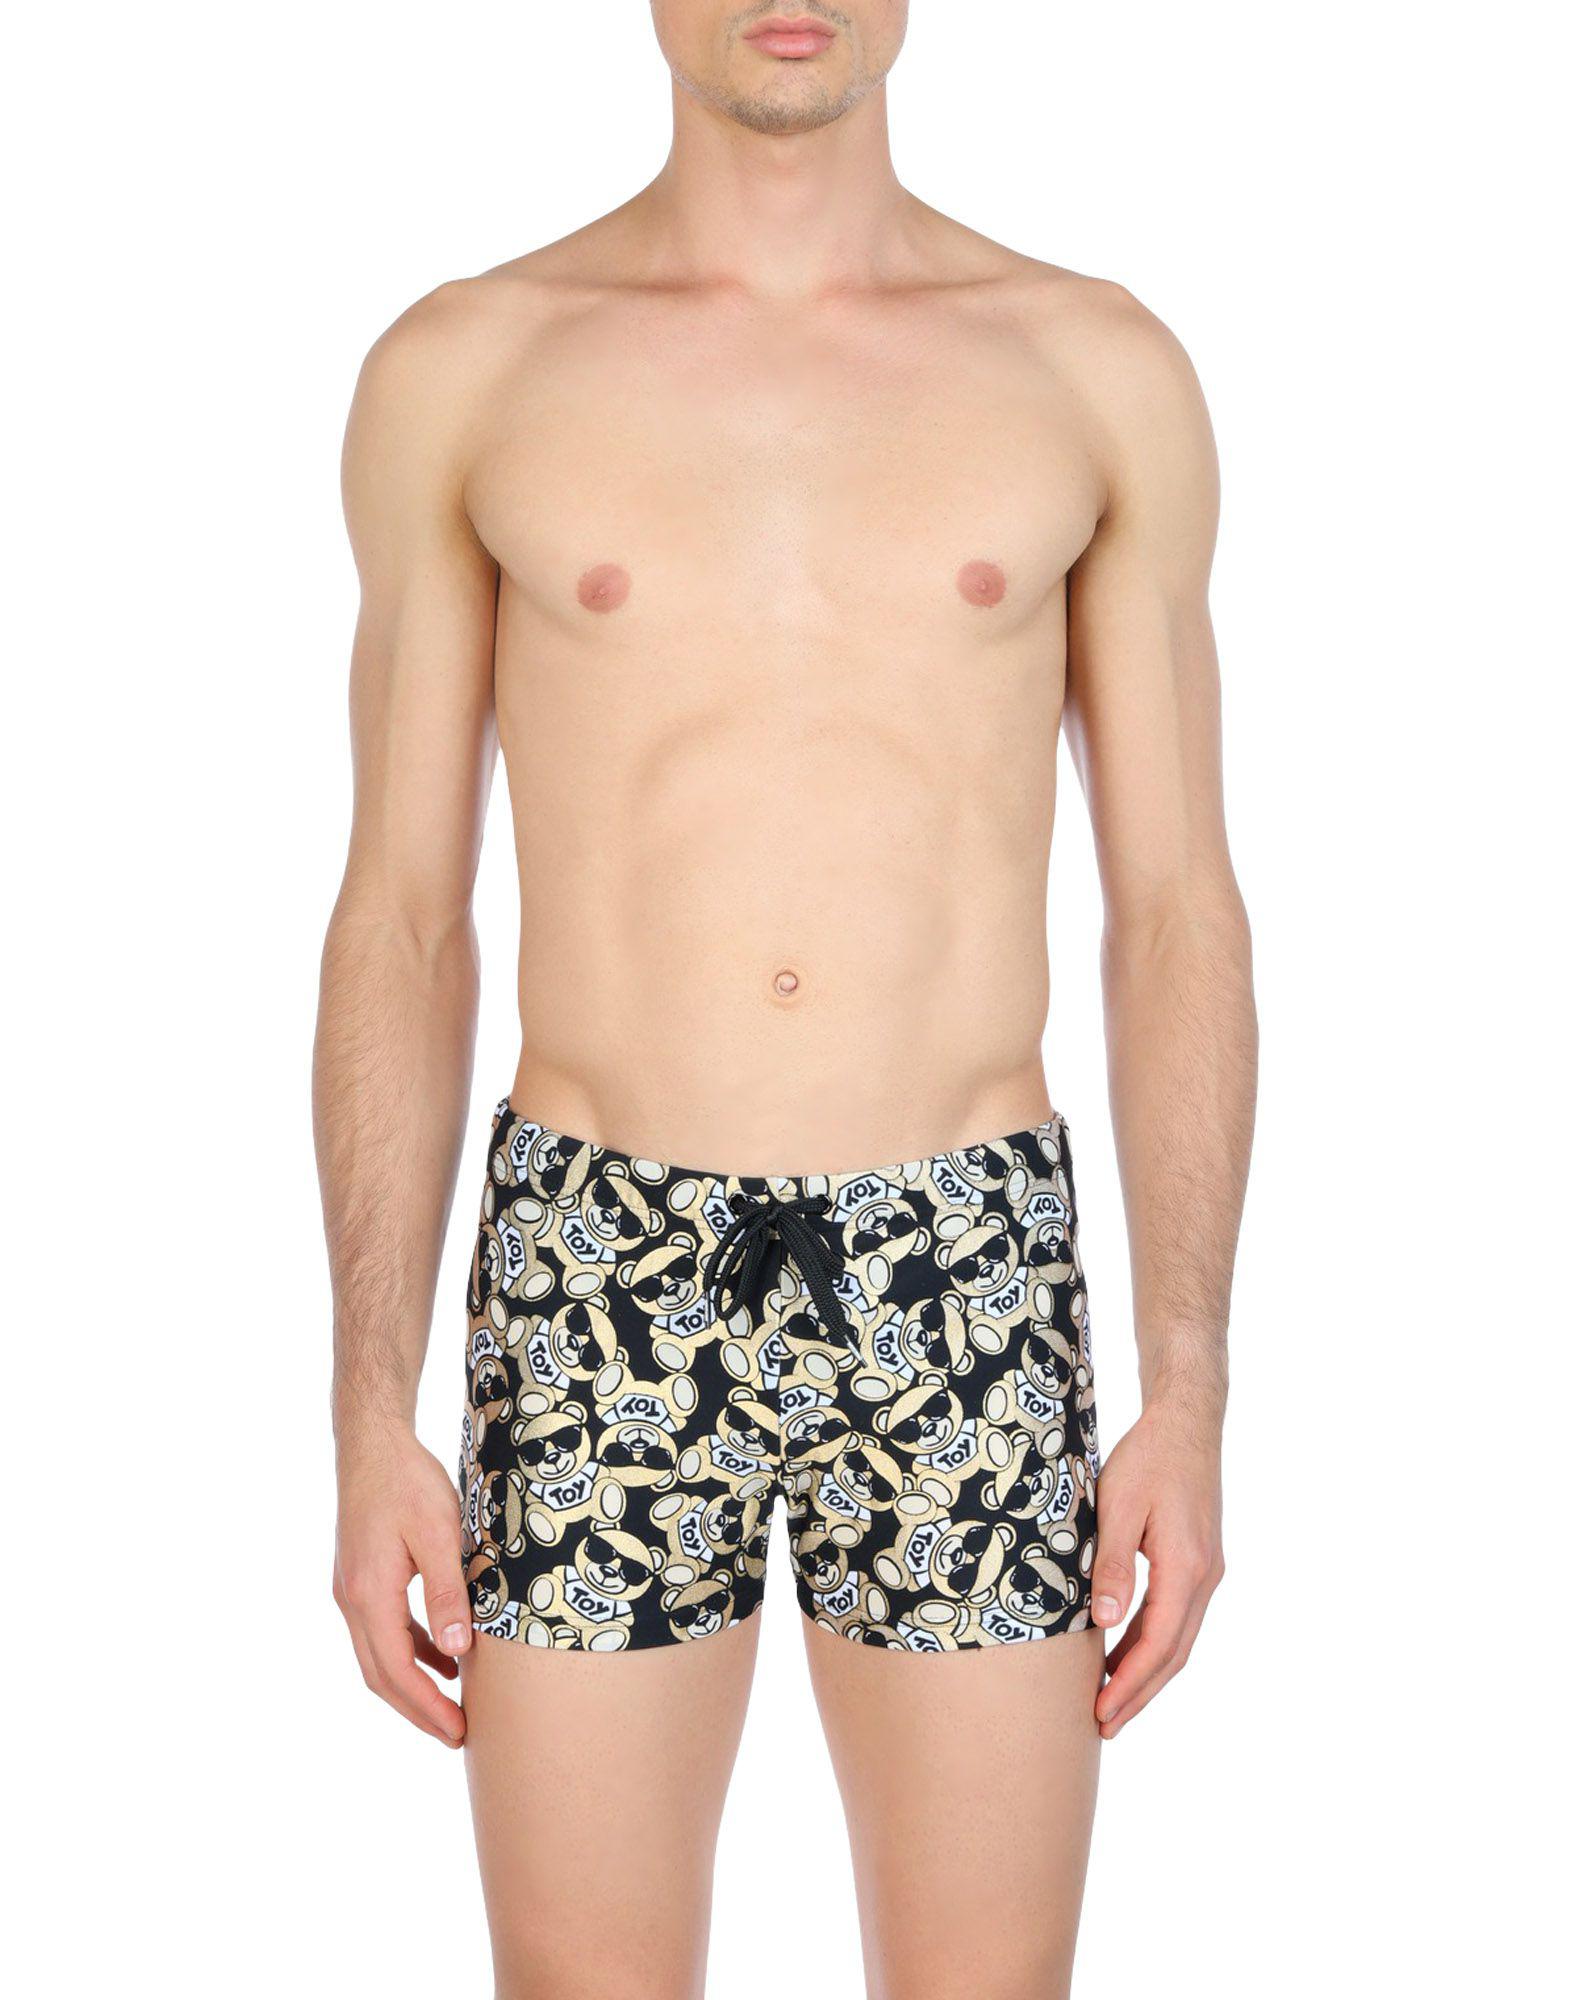 Moschino Synthetic Swim Trunks in Black for Men - Lyst